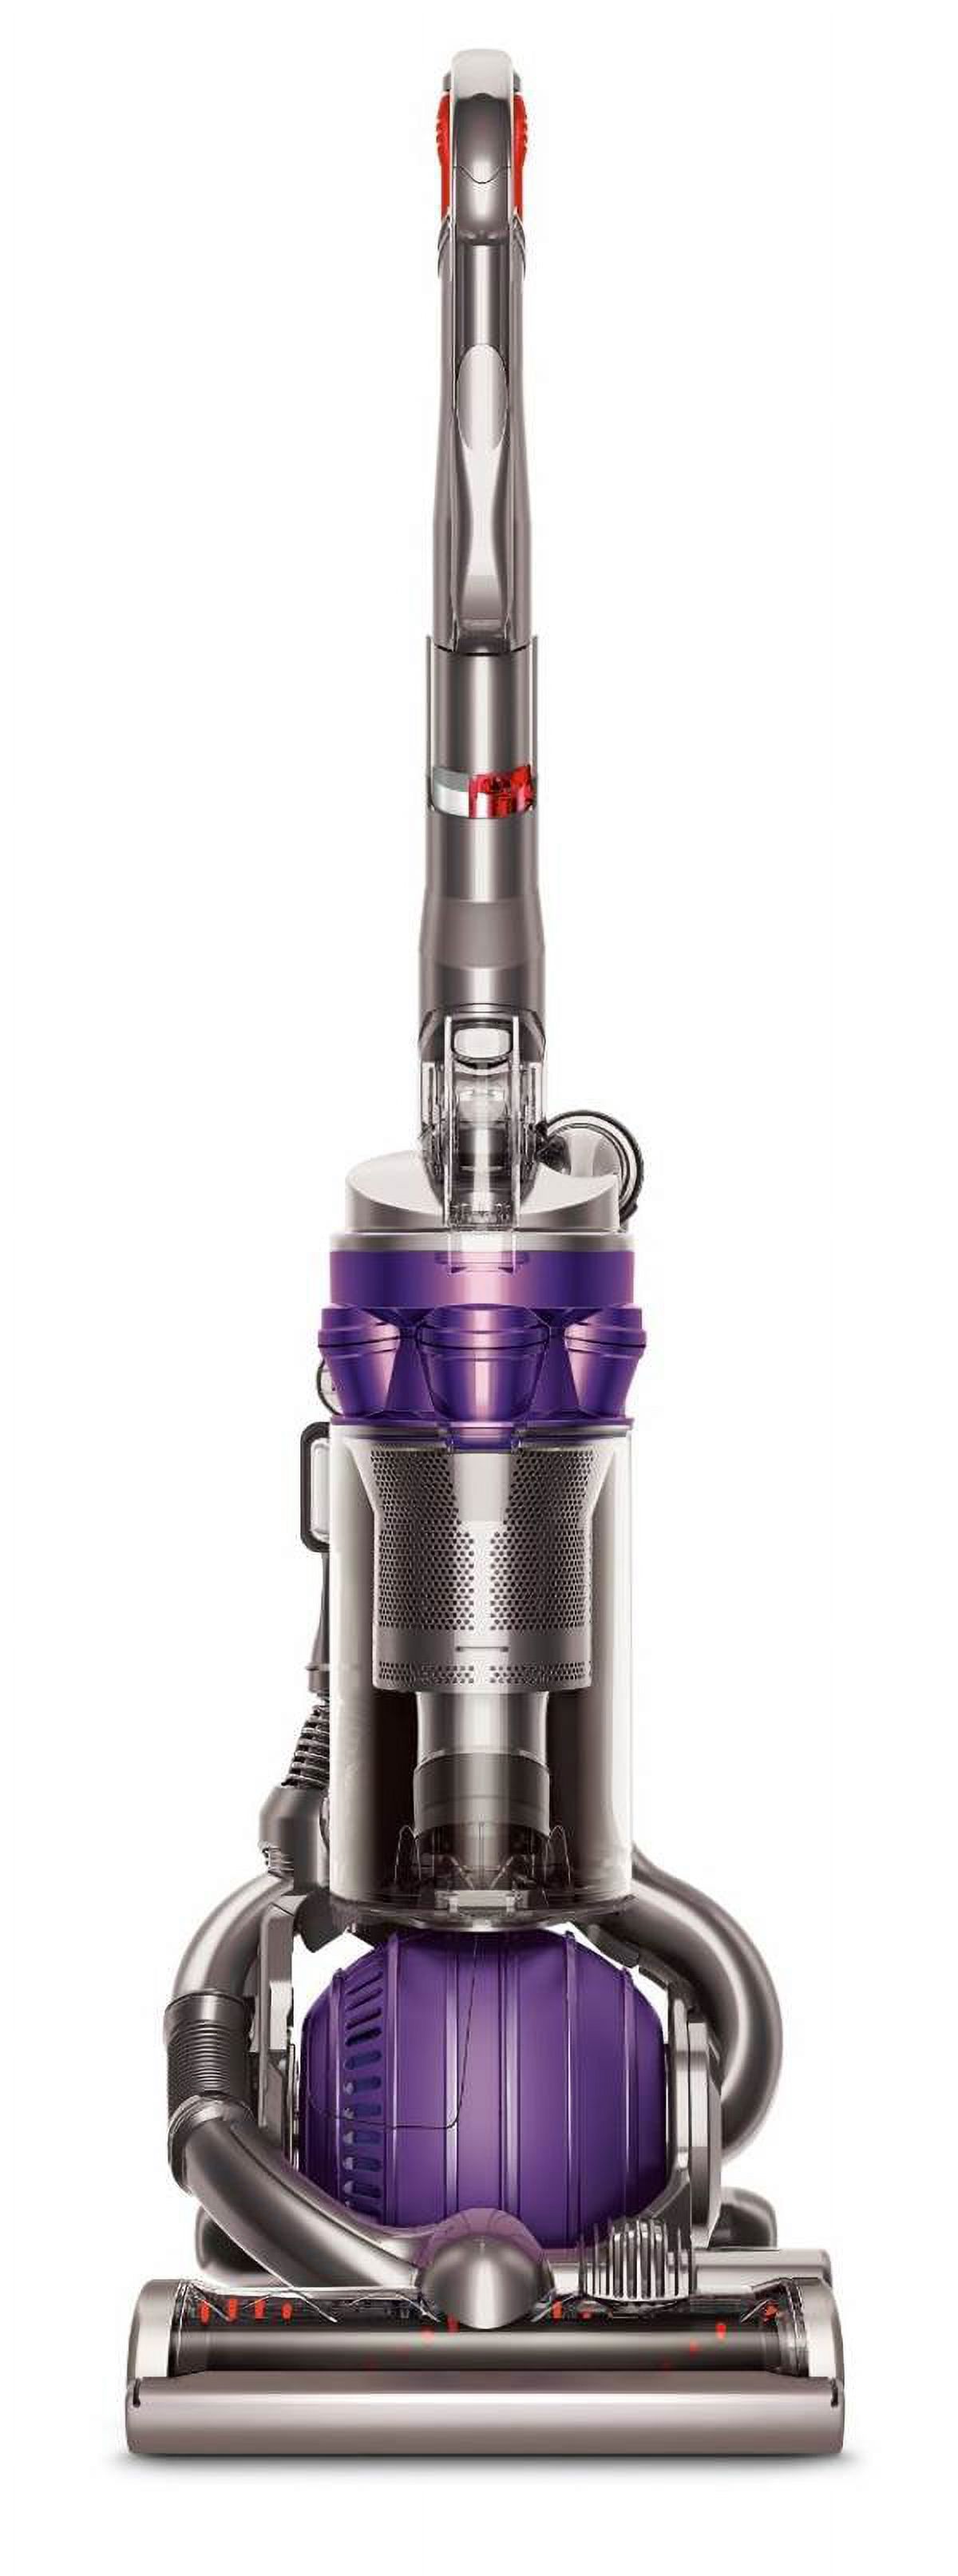 New Dyson 17418-01 DC25 The Ball Animal All-Floor Upright Bagless Vacuum Cleaner - image 2 of 12